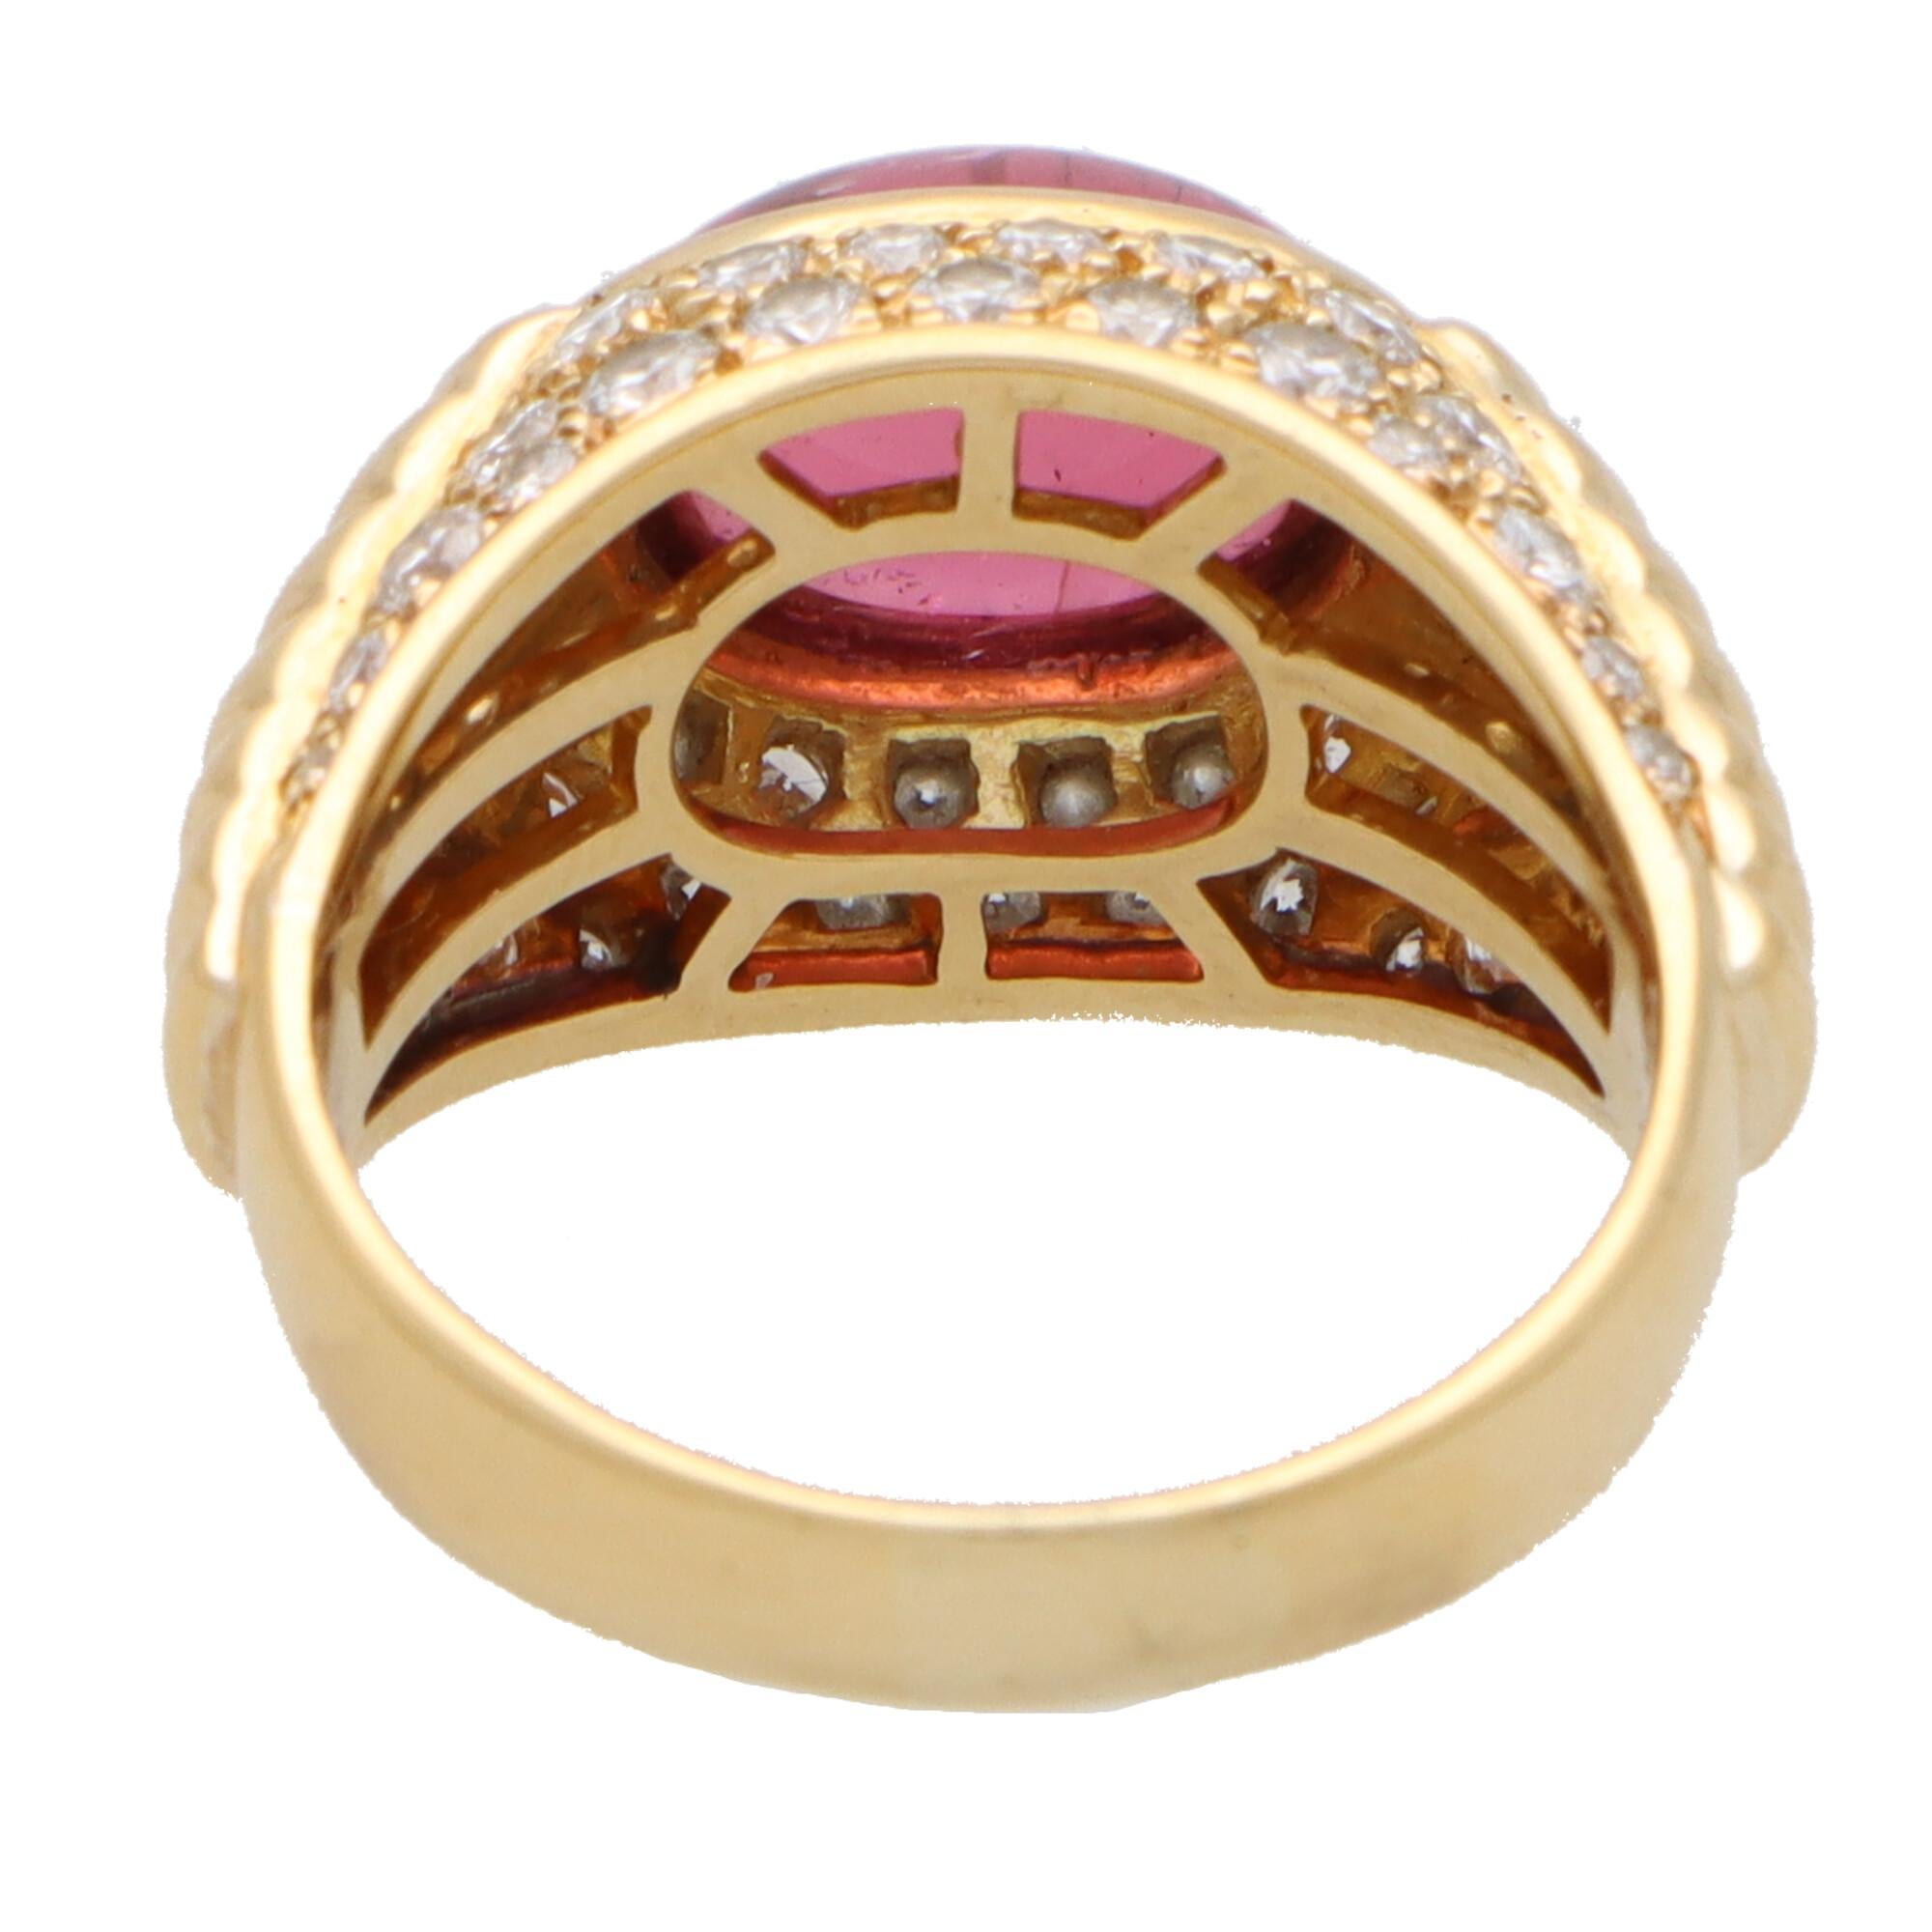 Vintage Bvlgari Tourmaline and Diamond Bypass Ring Set in 18k Yellow Gold For Sale 3